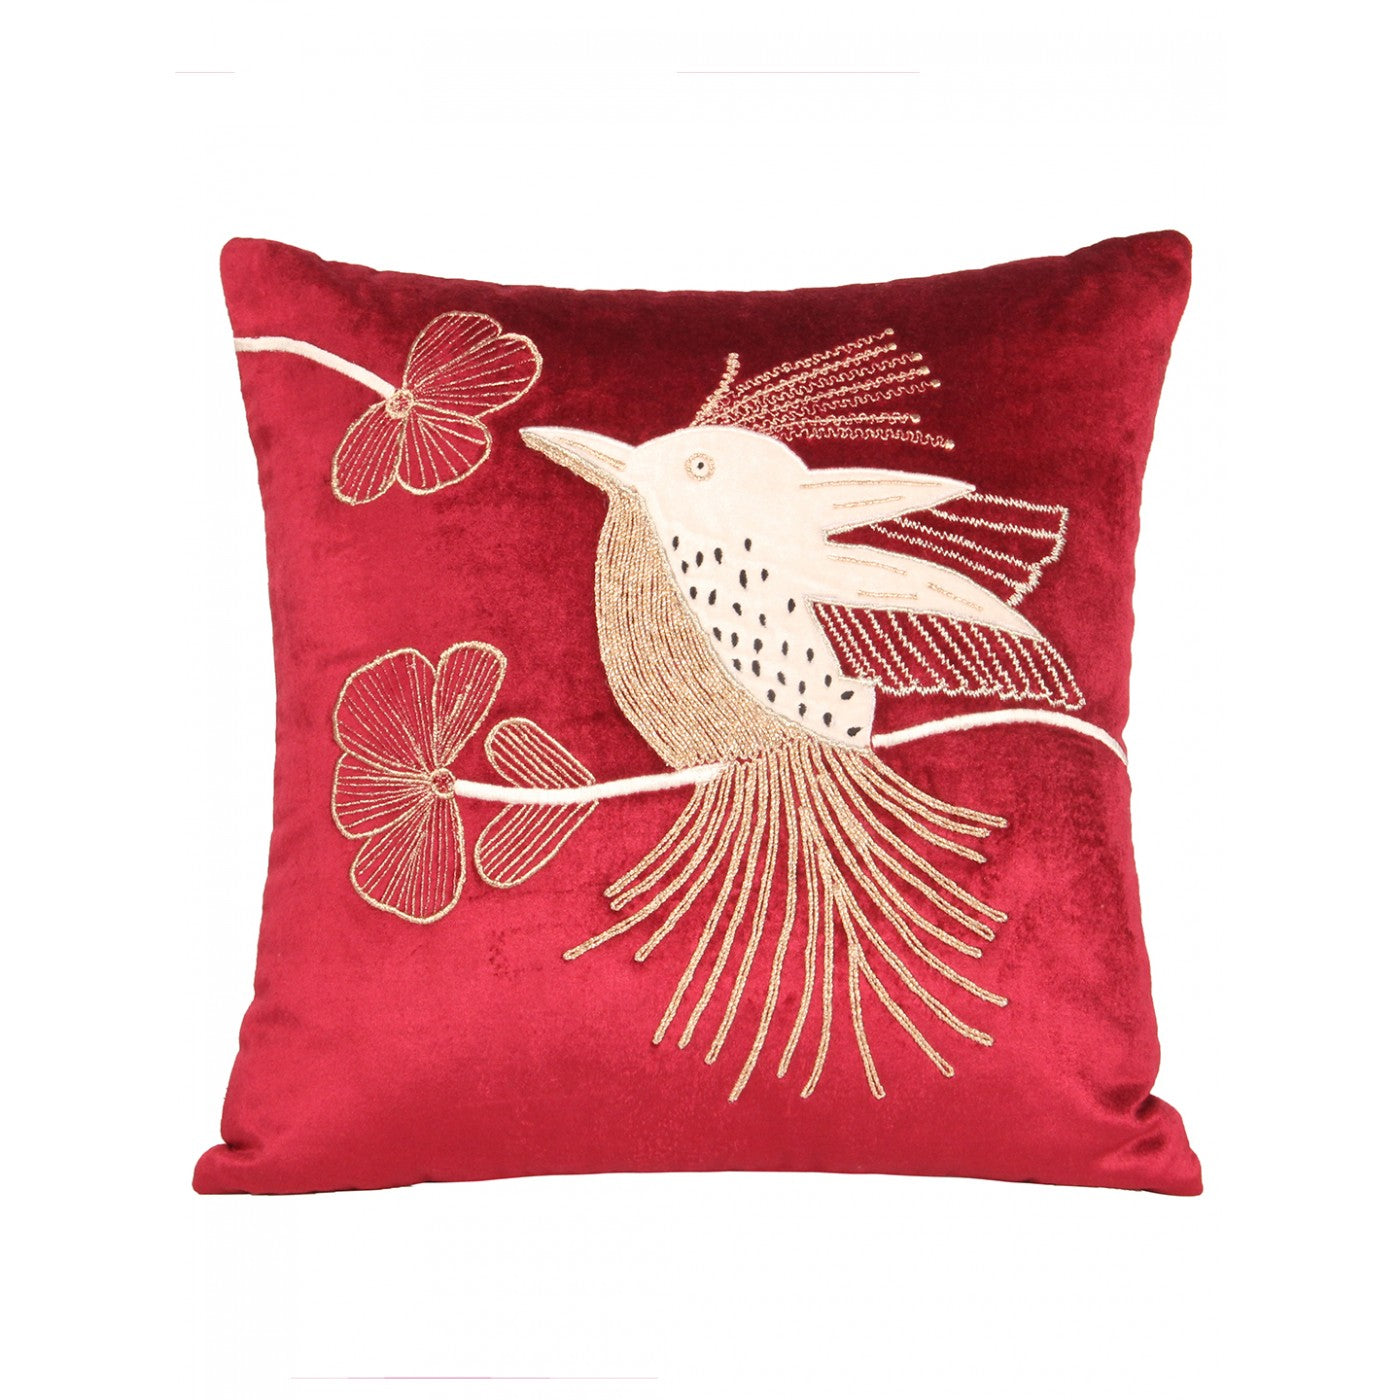 Luxurious 16x16 Inch Red Velvet Cushion Cover